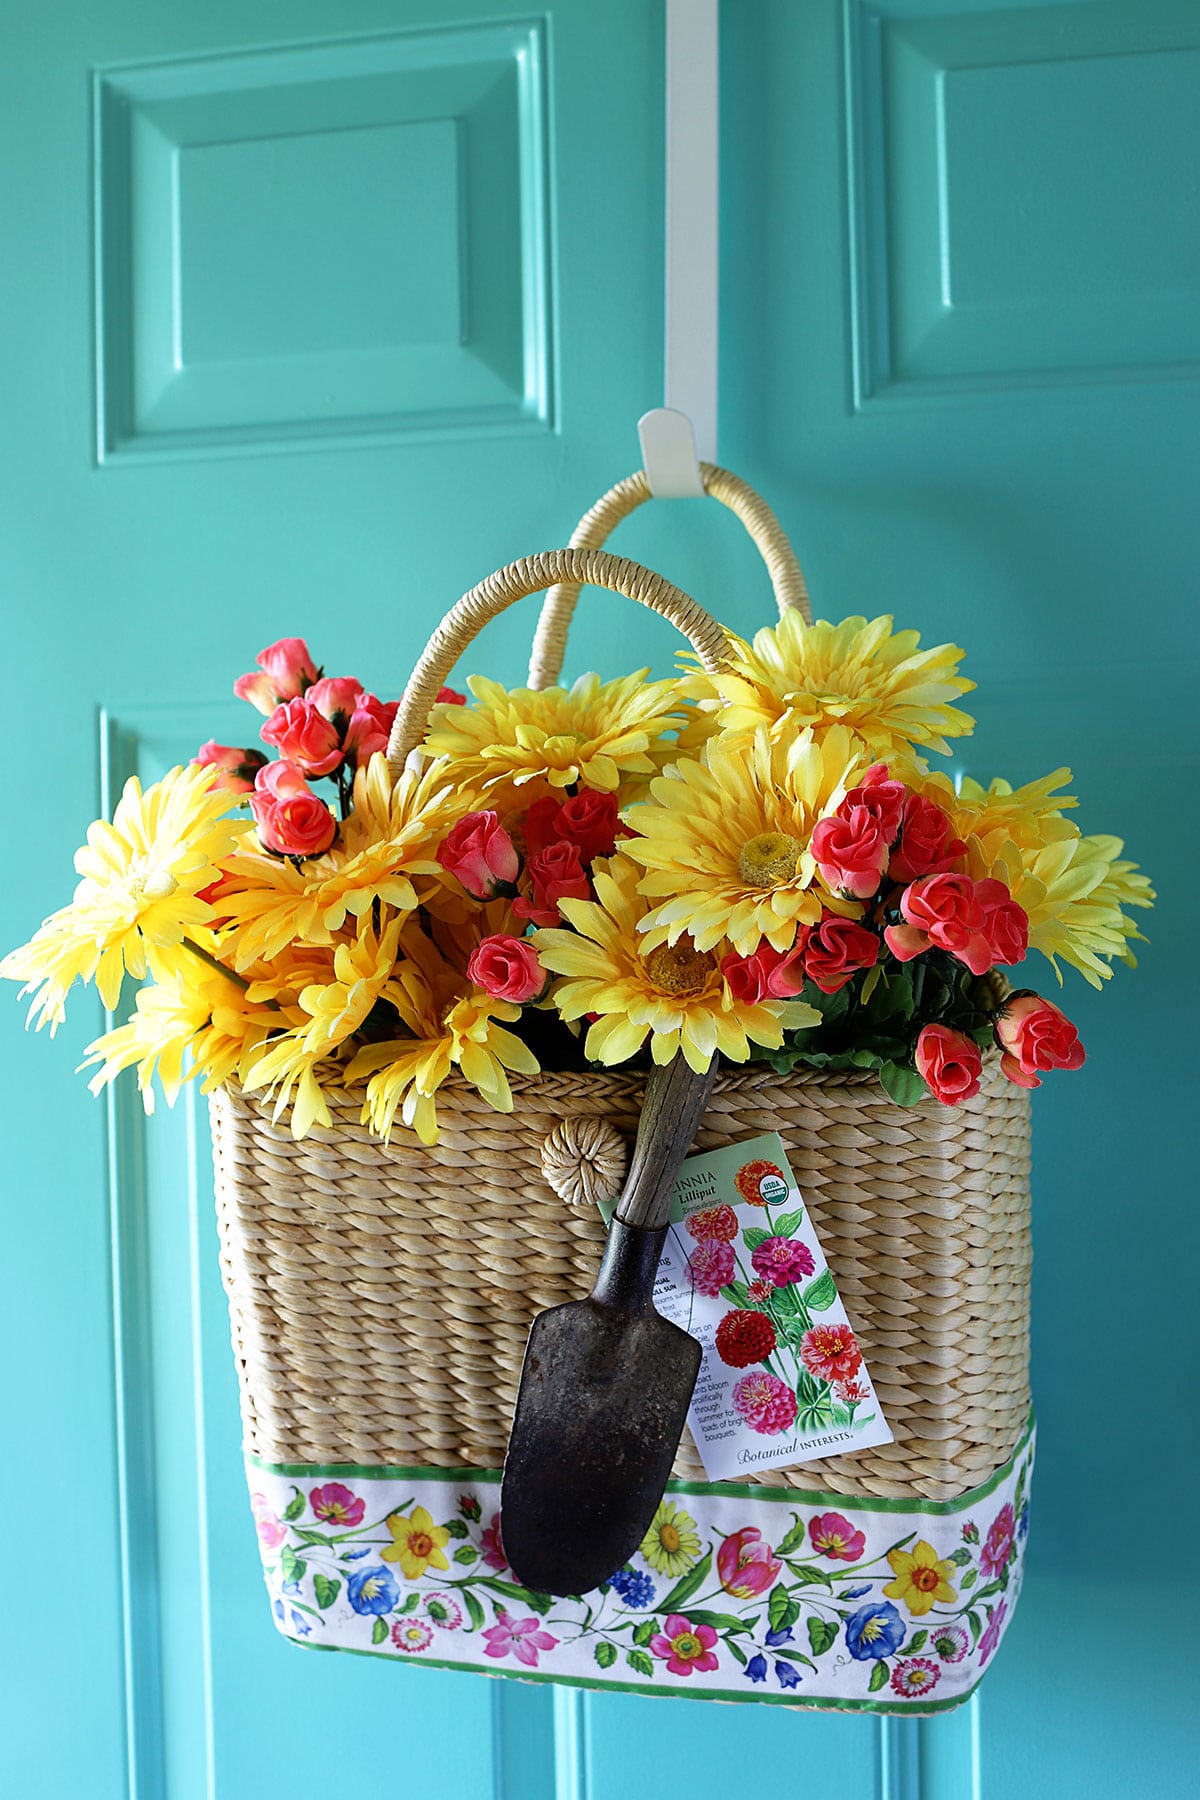 A straw purse hung as a wreath on a door with yellow daisies and bright pink roses.